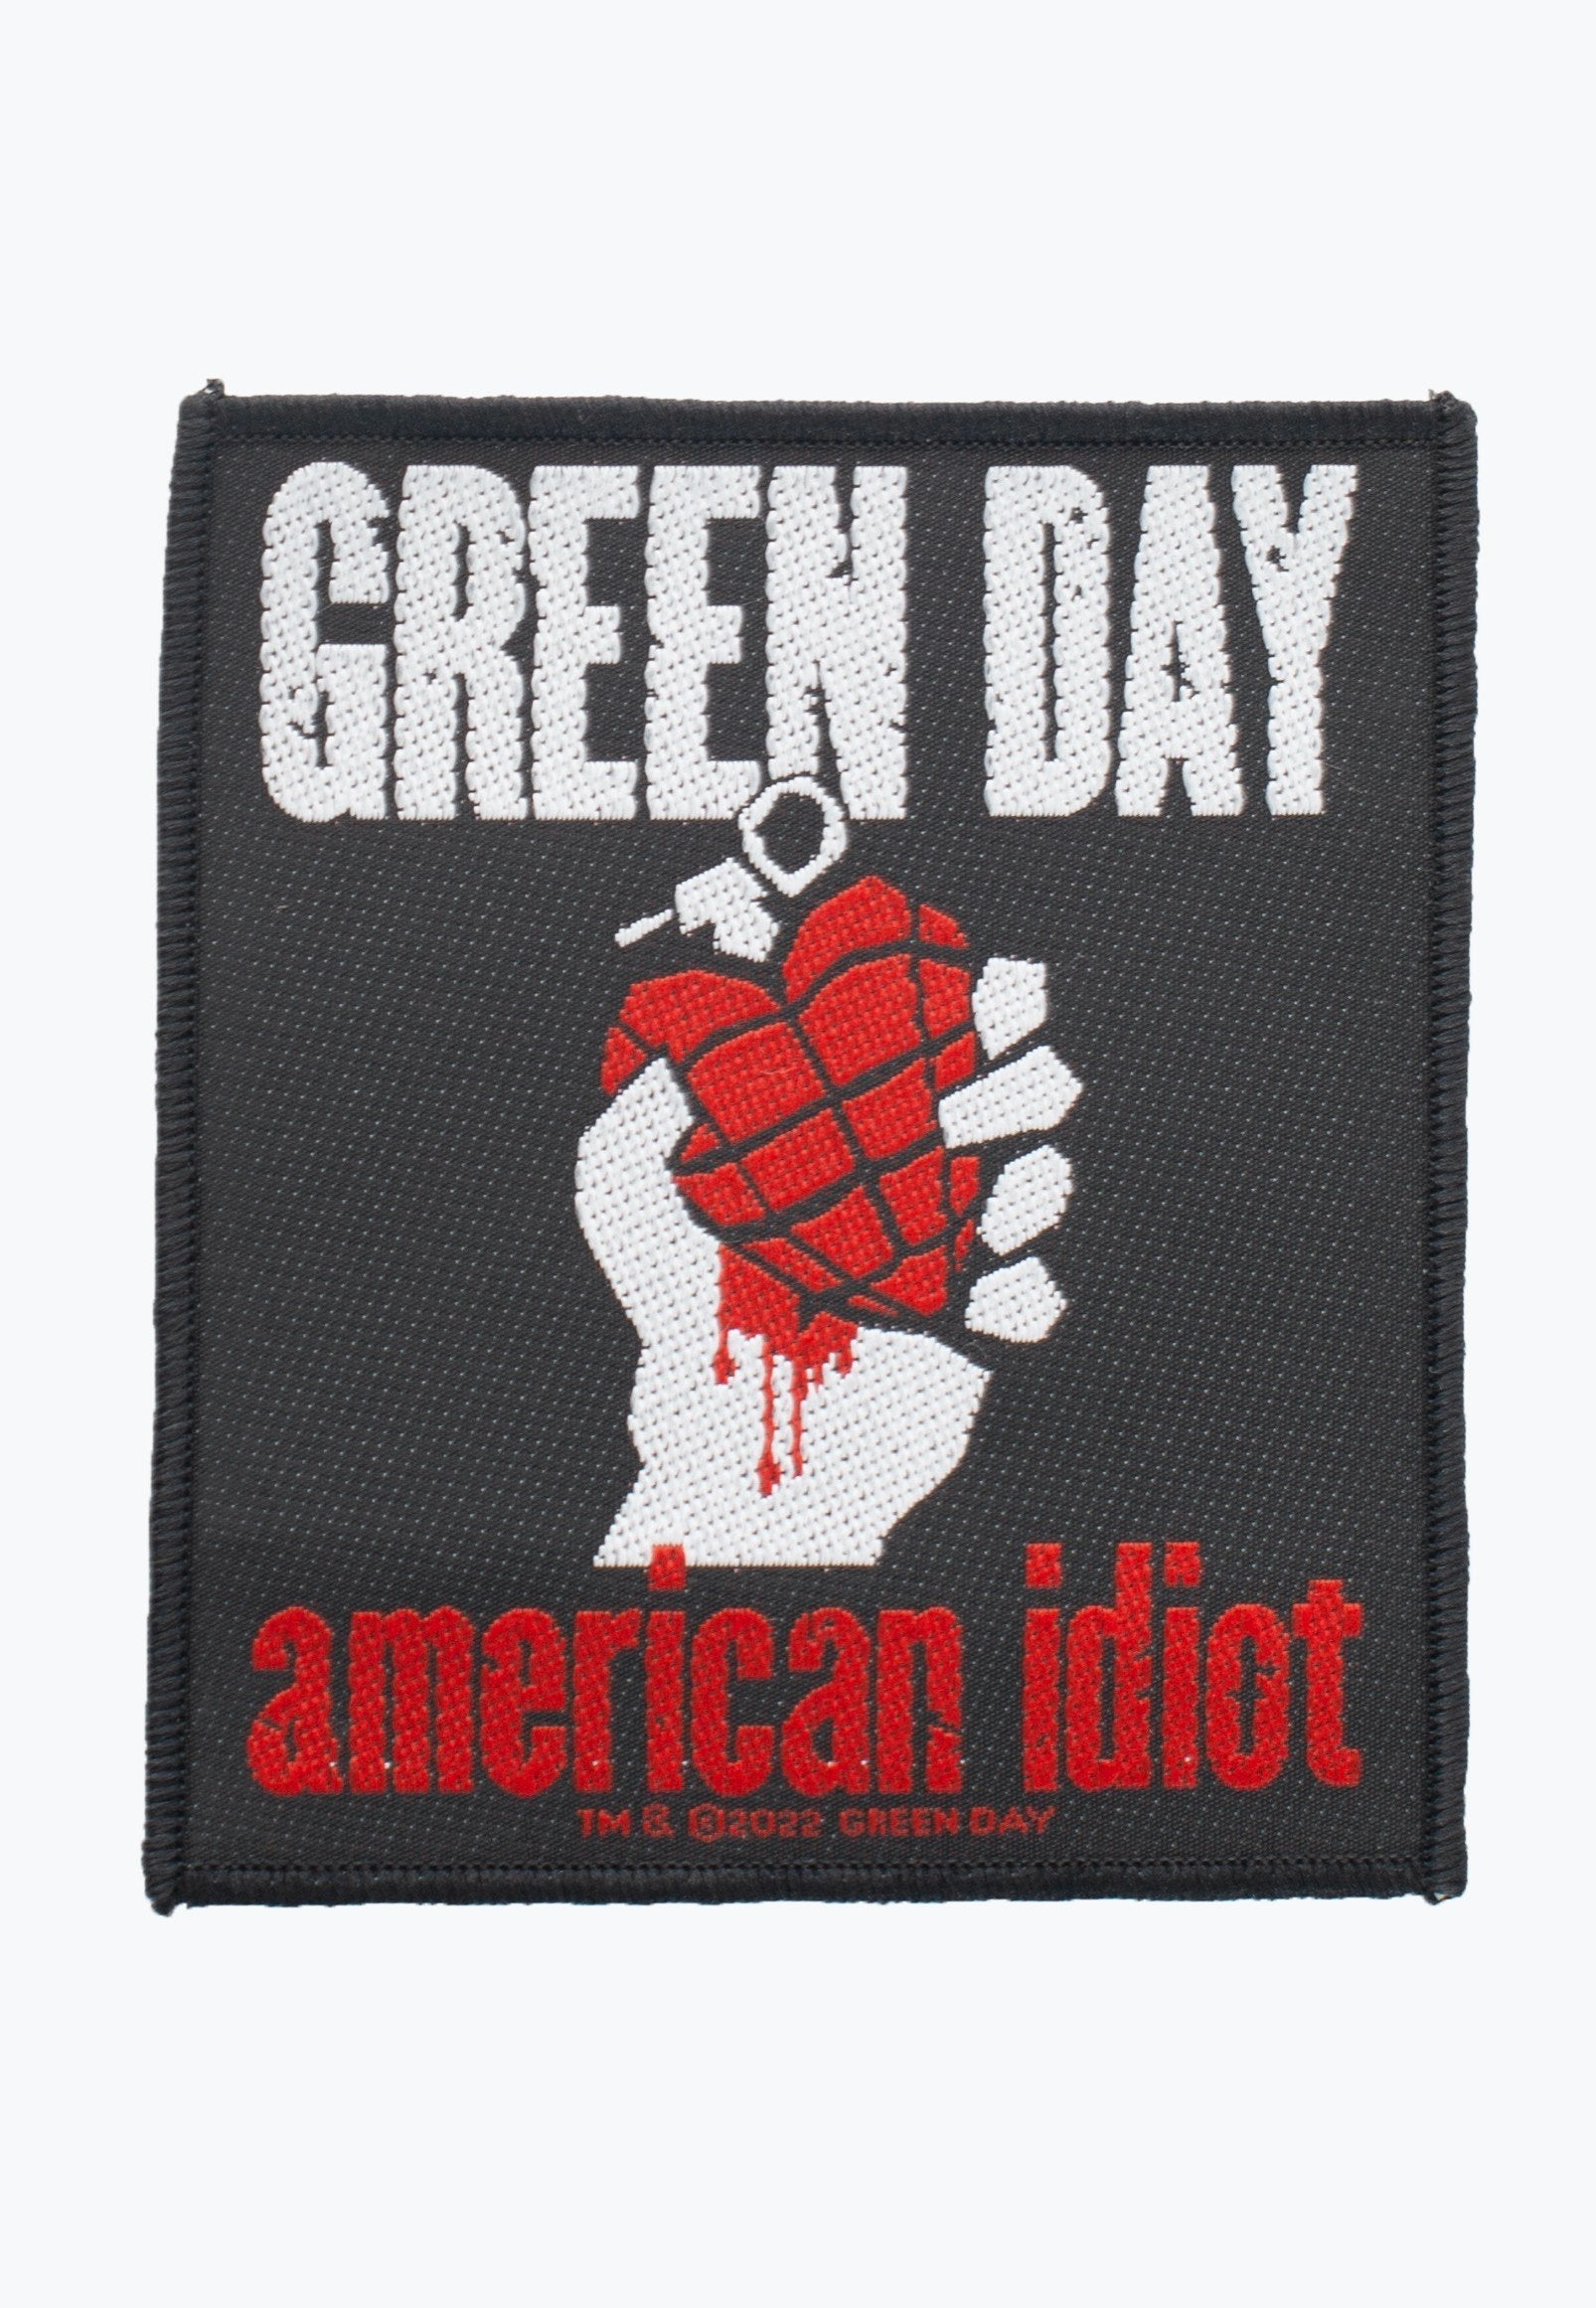 Green Day - American Idiot - Patch